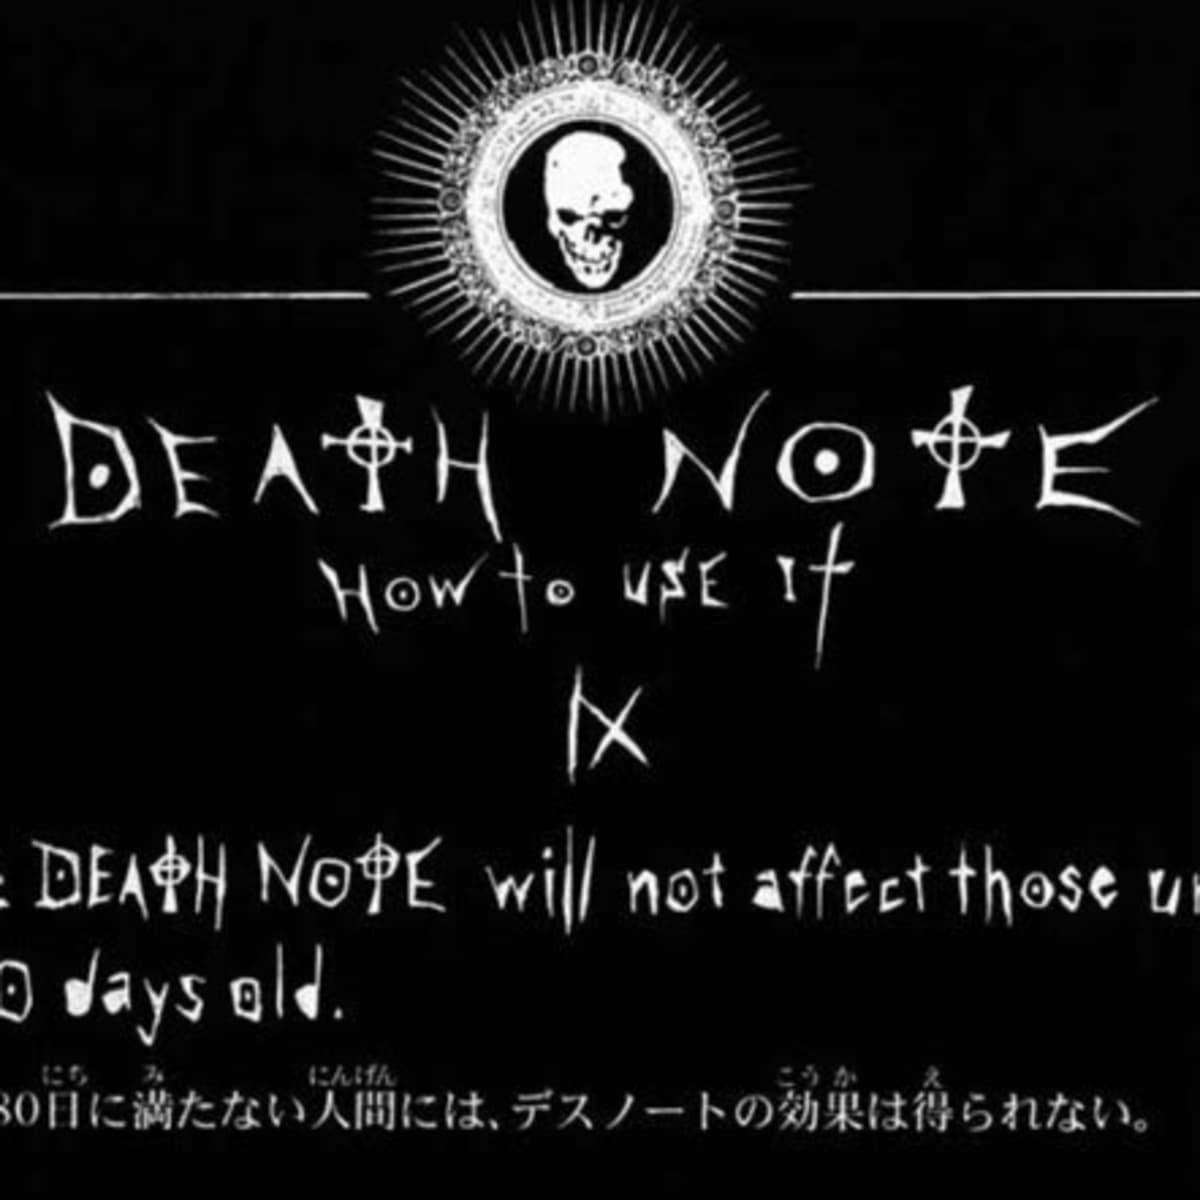 death note rules manga different than the anime